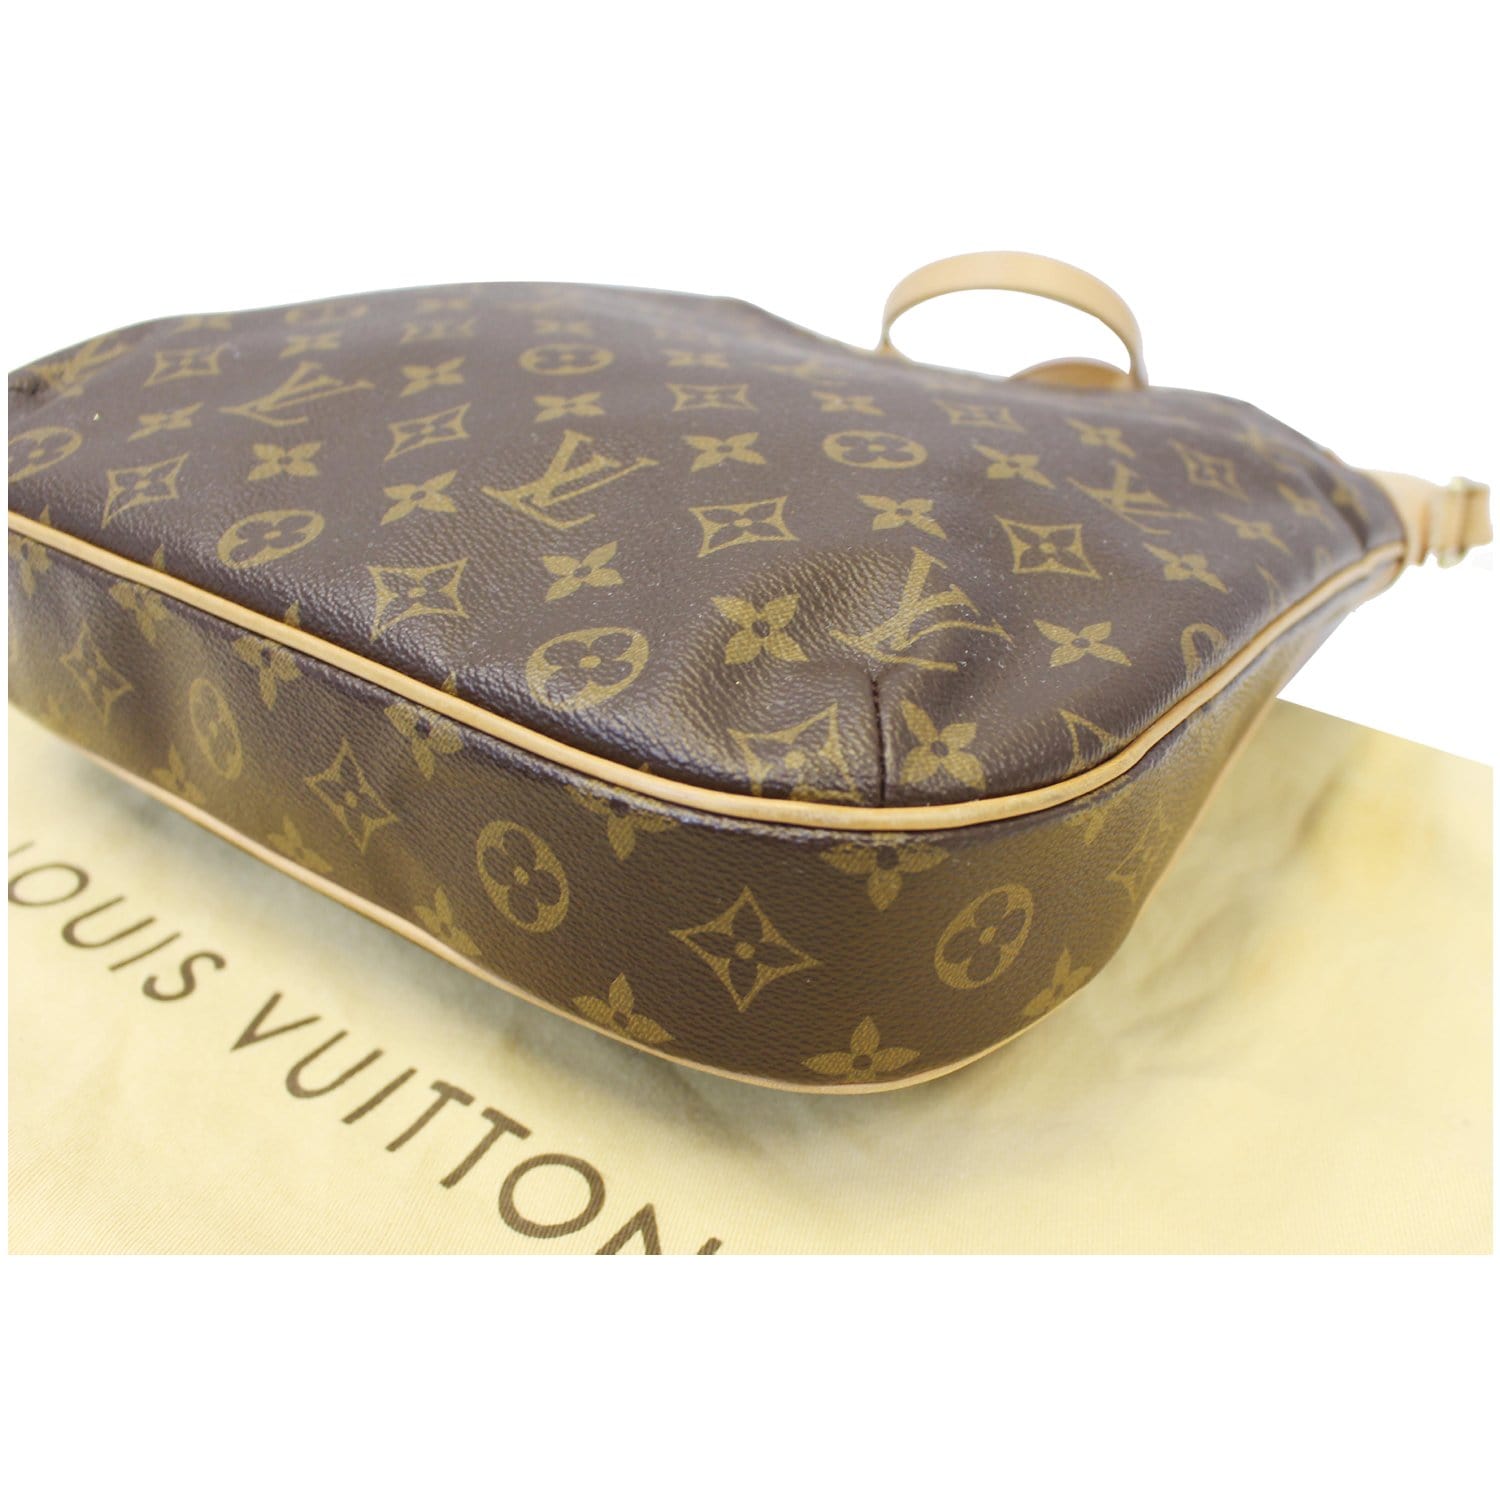 Louis Vuitton Odeon MM In-Depth Review 👜 What Fits & Mod Shots